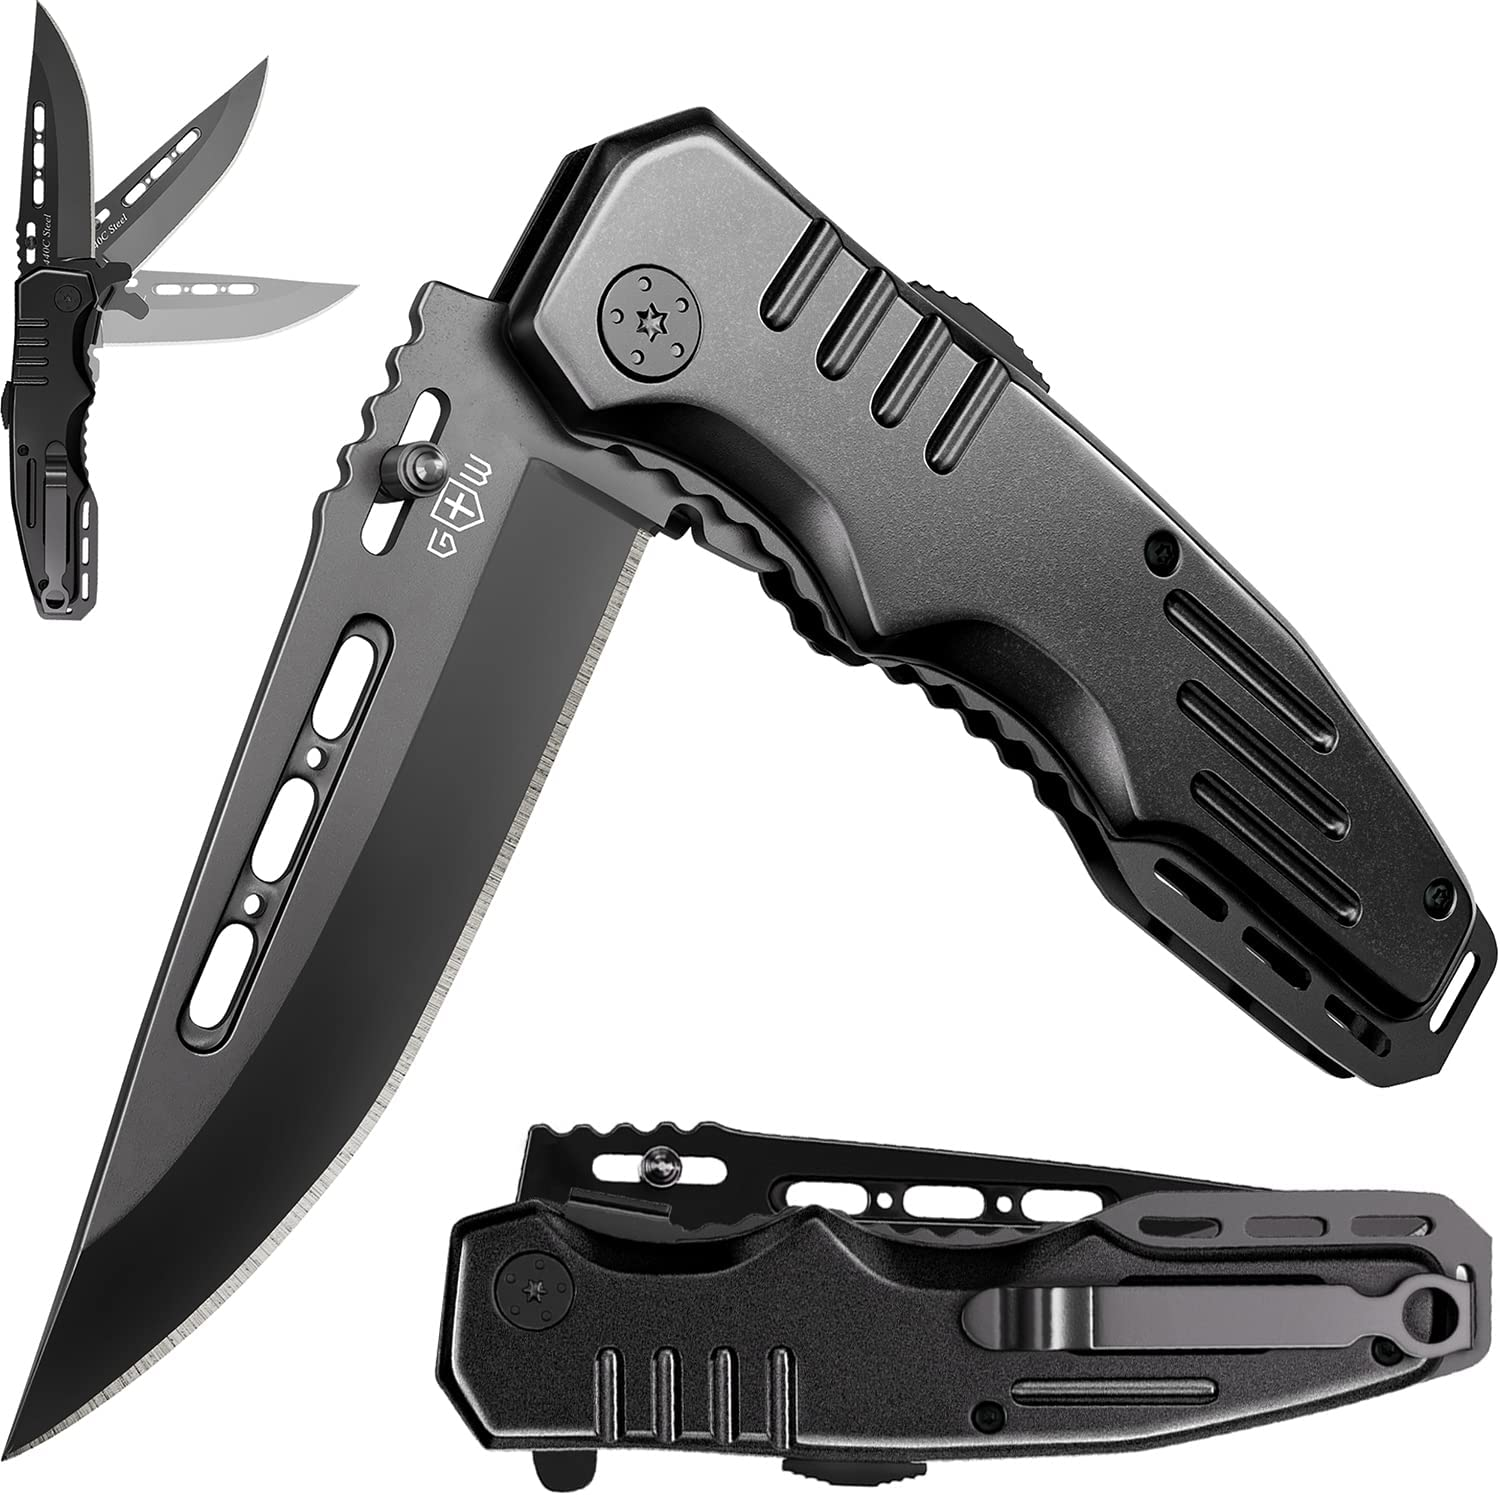 Spring Assisted Knife - Pocket Folding Knife - Military Style - Boy Scouts Knife - Tactical Knife - Good for Camping Hunting Survival Indoor and Outdoor Activities Mens Gift